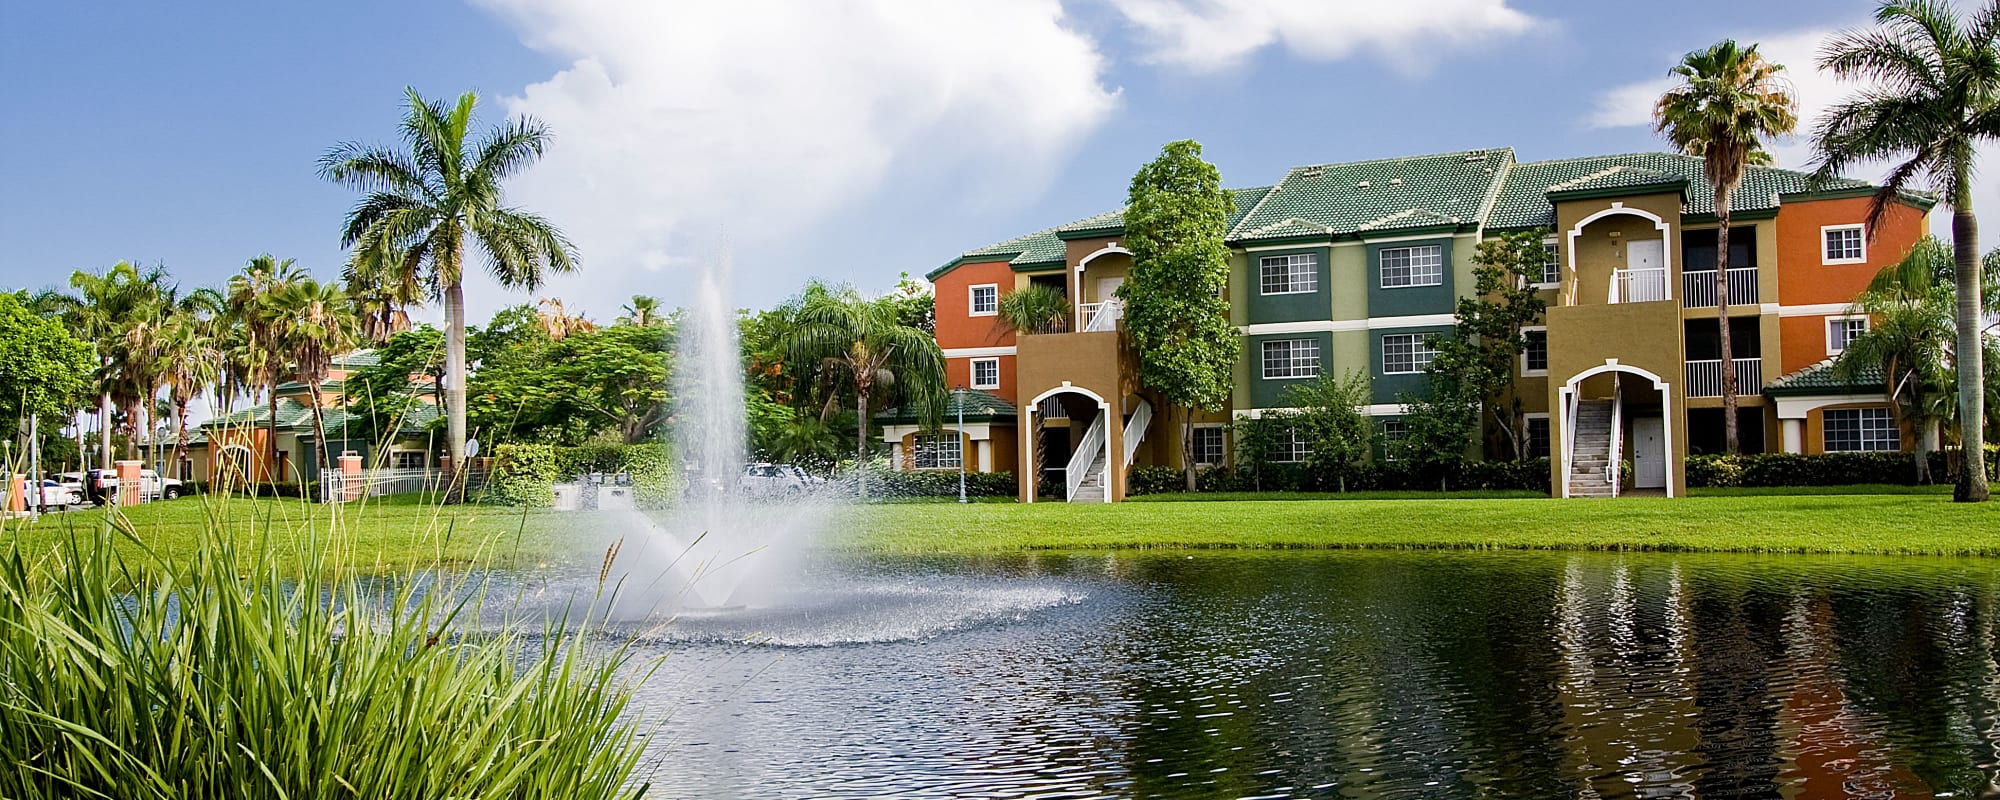 Privacy policy at Weston Place Apartments in Weston, Florida